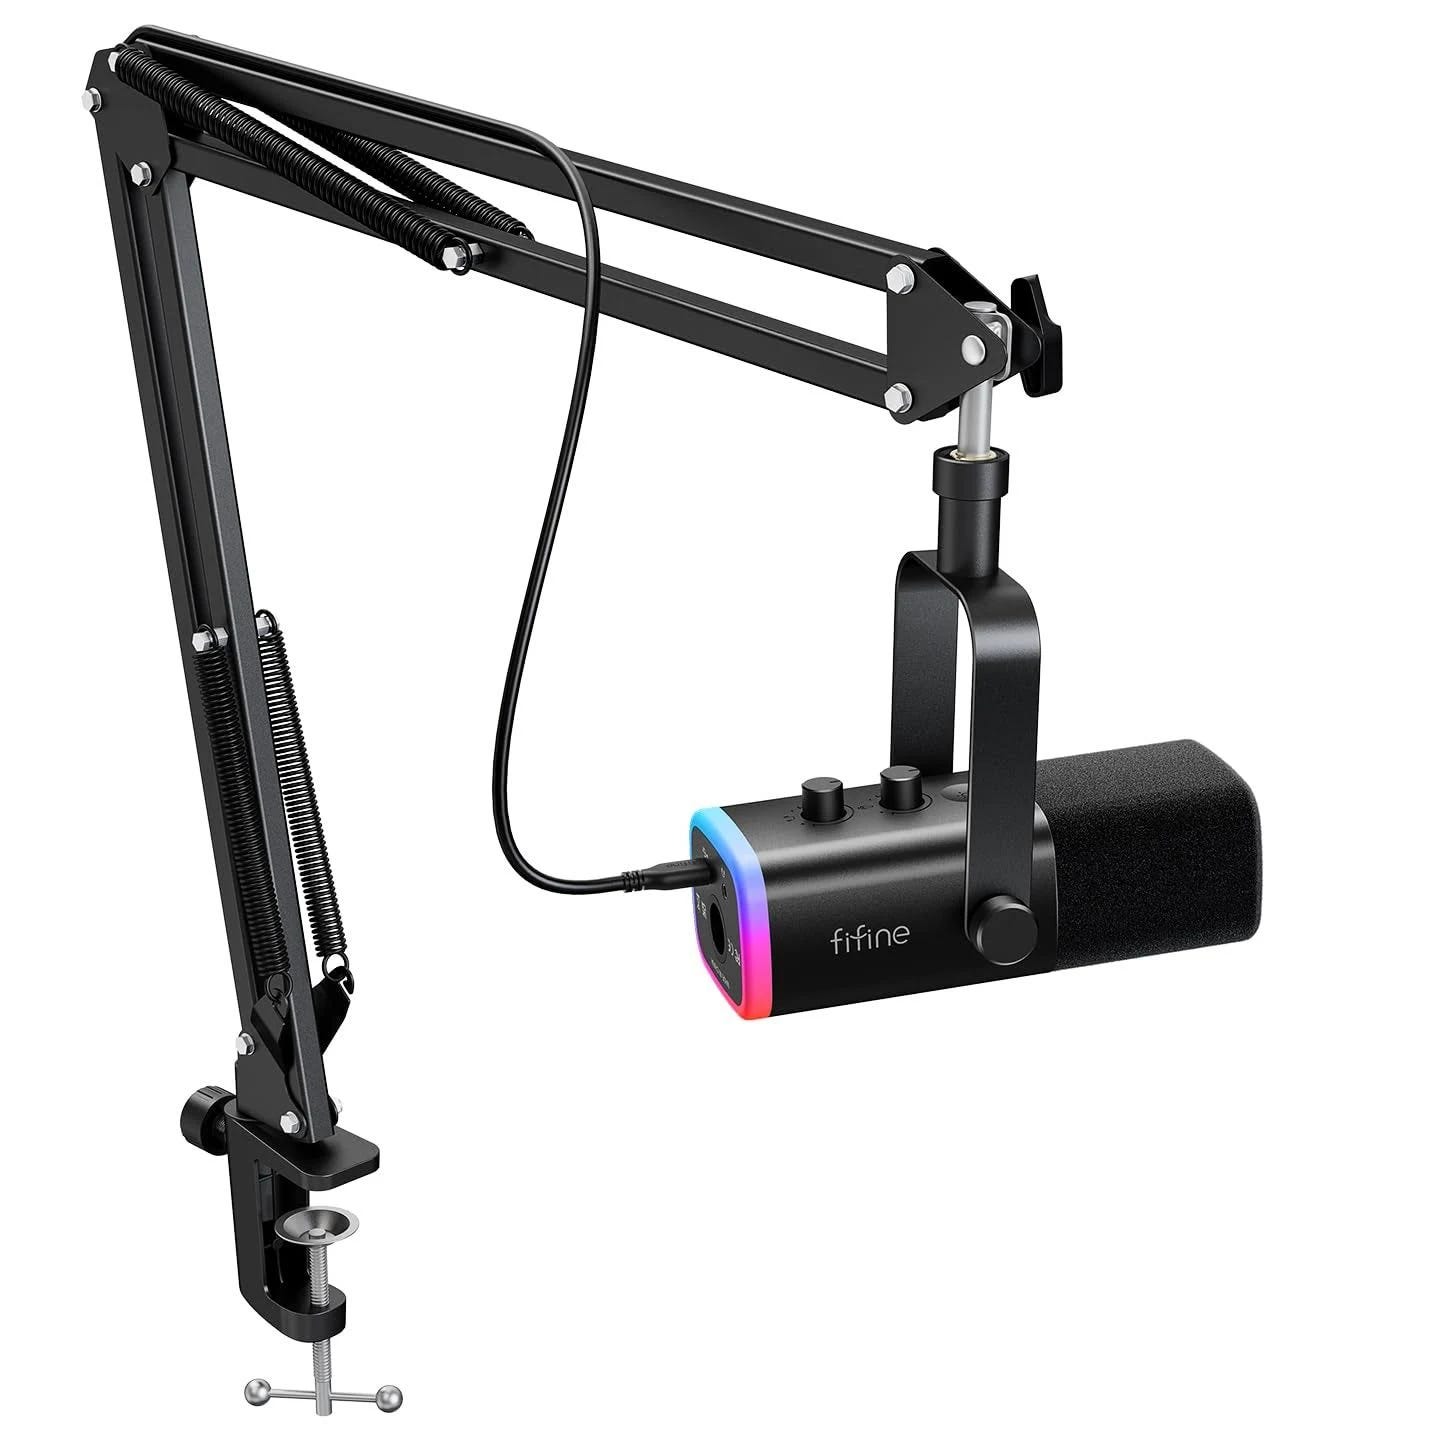 FIFINE XLR/USB Gaming Microphone with RGB Lighting and Boom Arm | Image